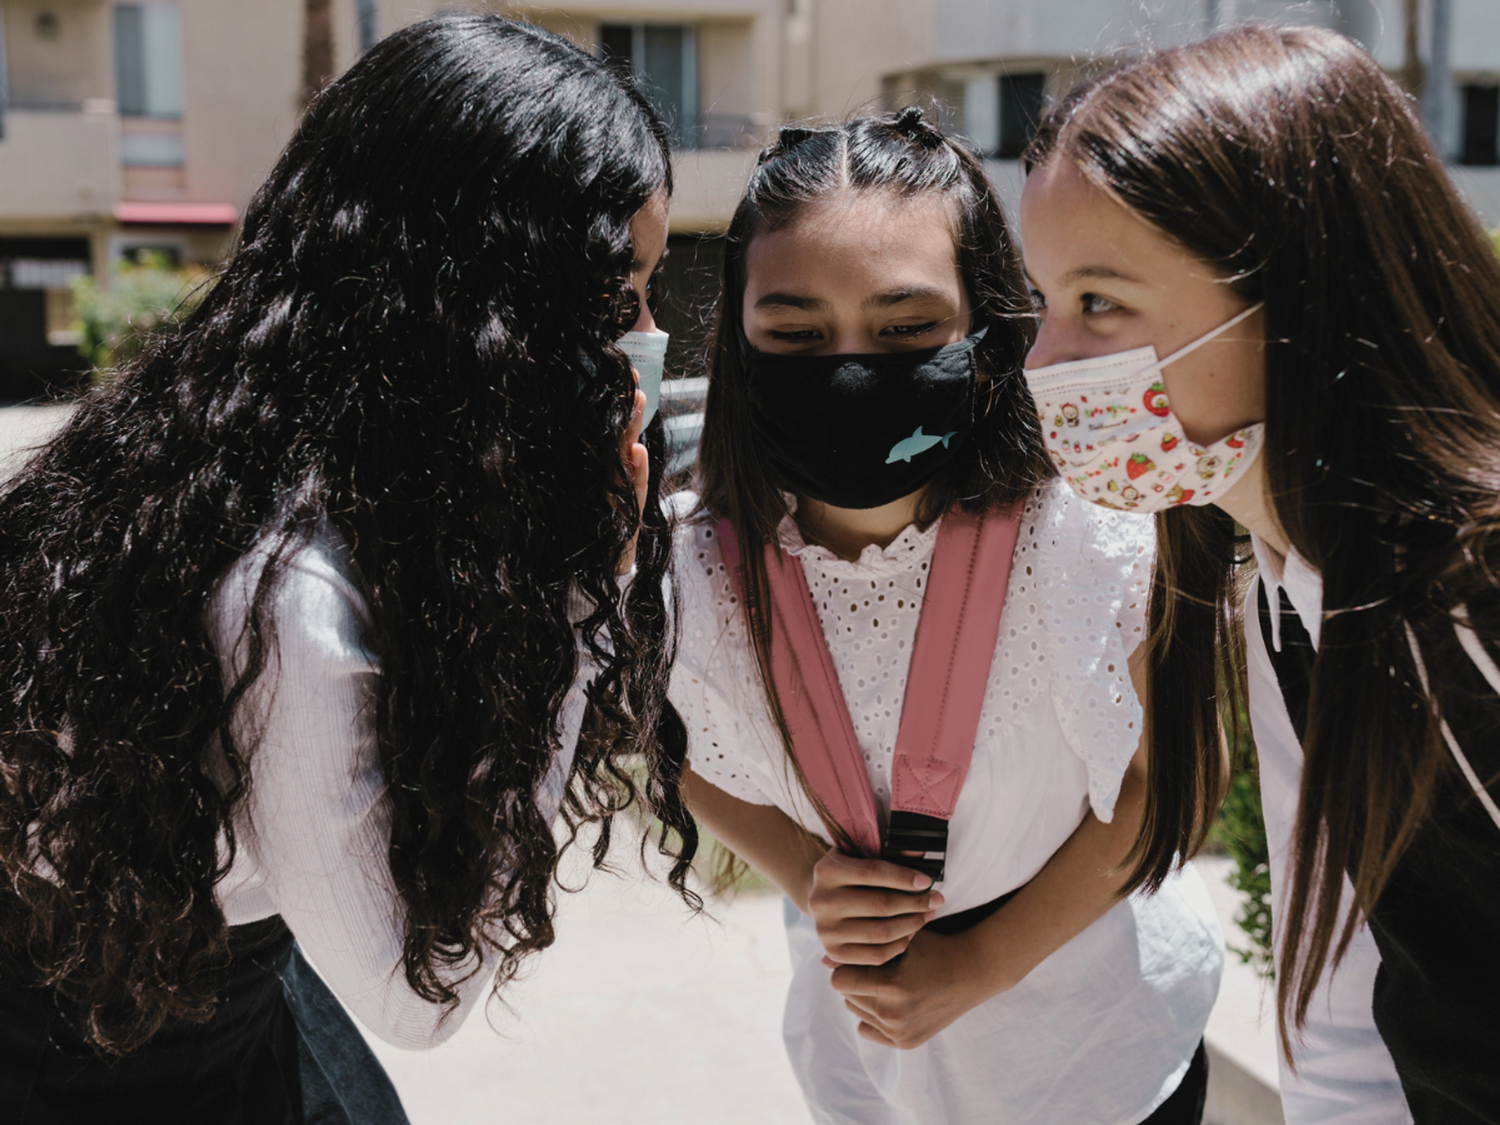 Students wearing face masks at school.